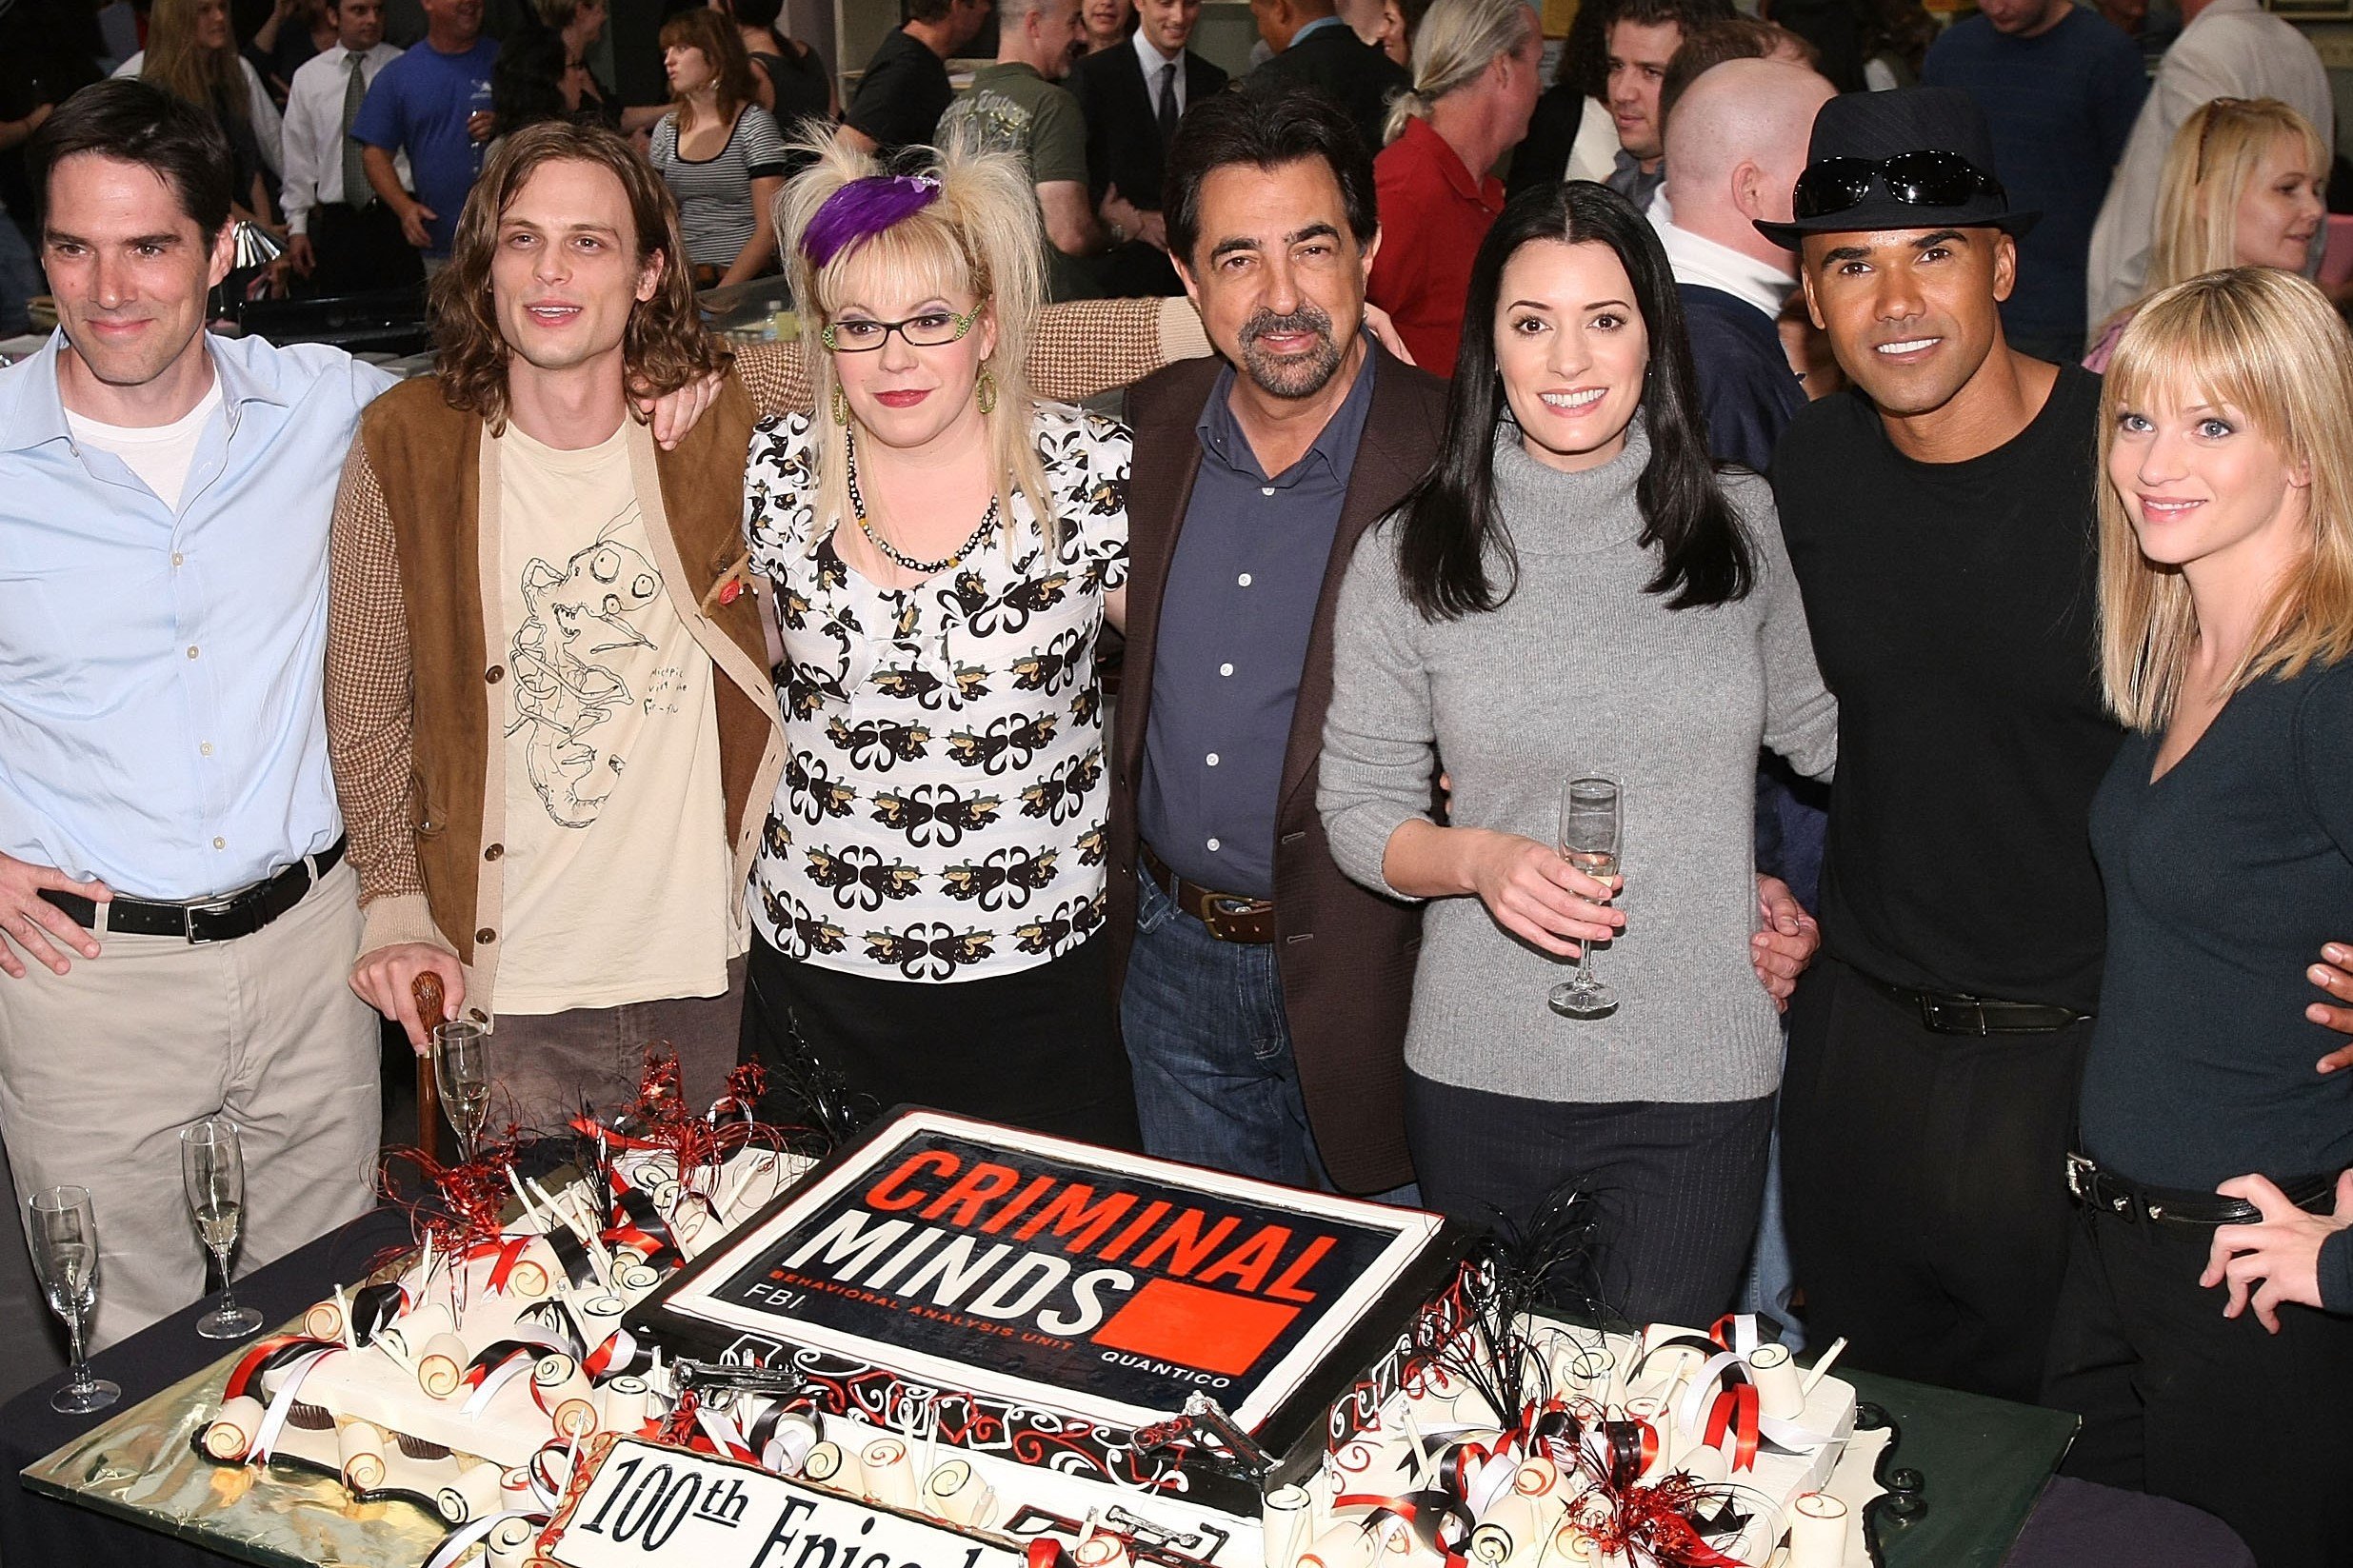 LOS ANGELES, CA - OCTOBER 19: Cast and Crew of "Criminal Minds" Celebrates the 100th Episode at Quixote Studios on October 19, 2009 in Los Angeles, California.